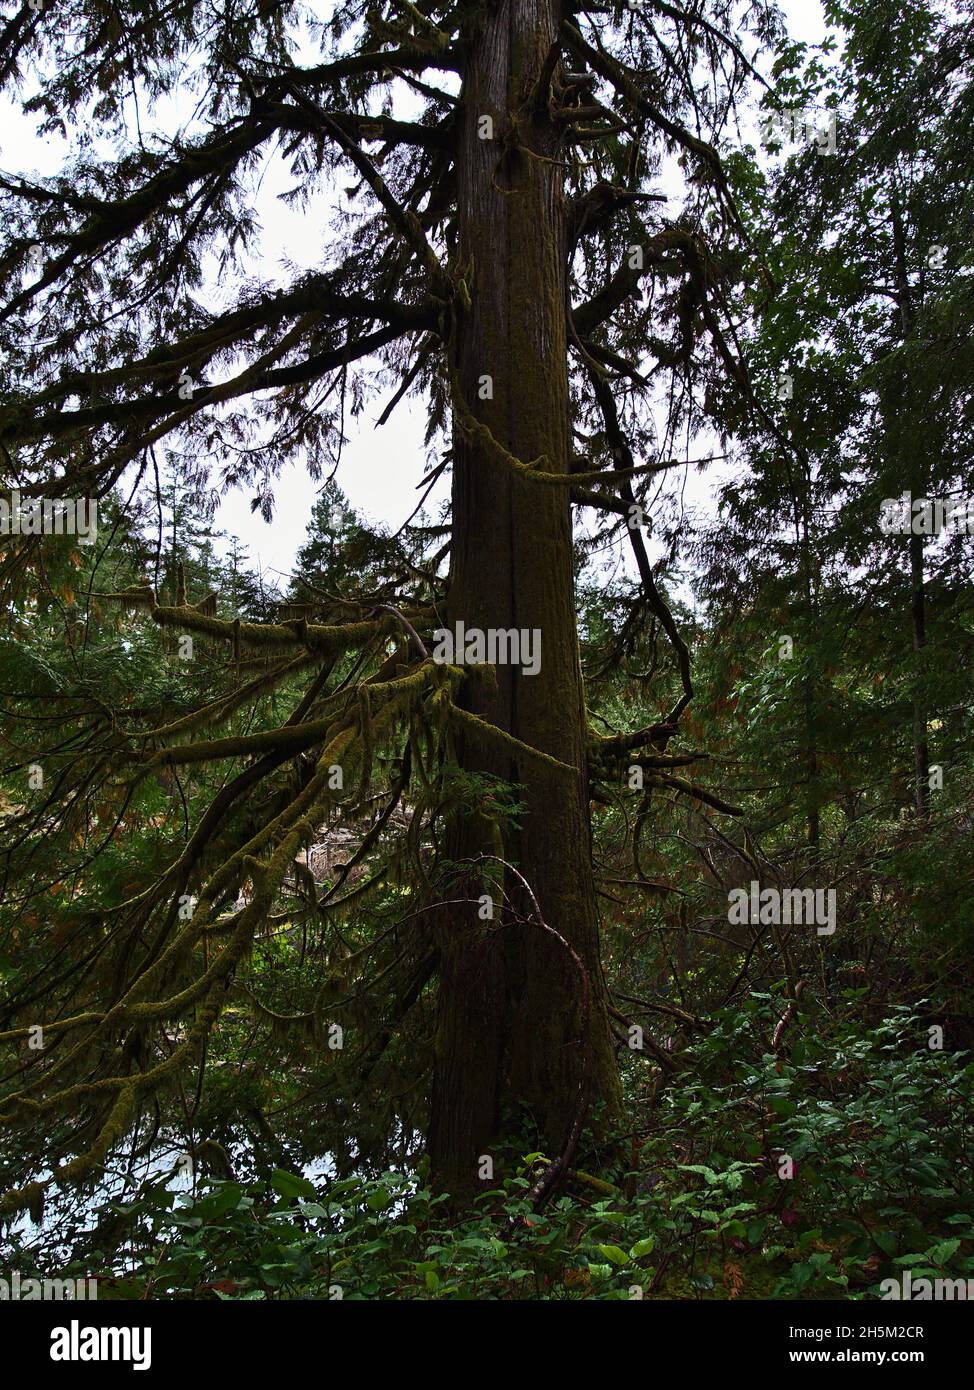 View of old Douglas fir tree with moss-covered trunk and branches in forest at Little Qualicum Falls Provincial Park on Vancouver Island, BC, Canada. Stock Photo